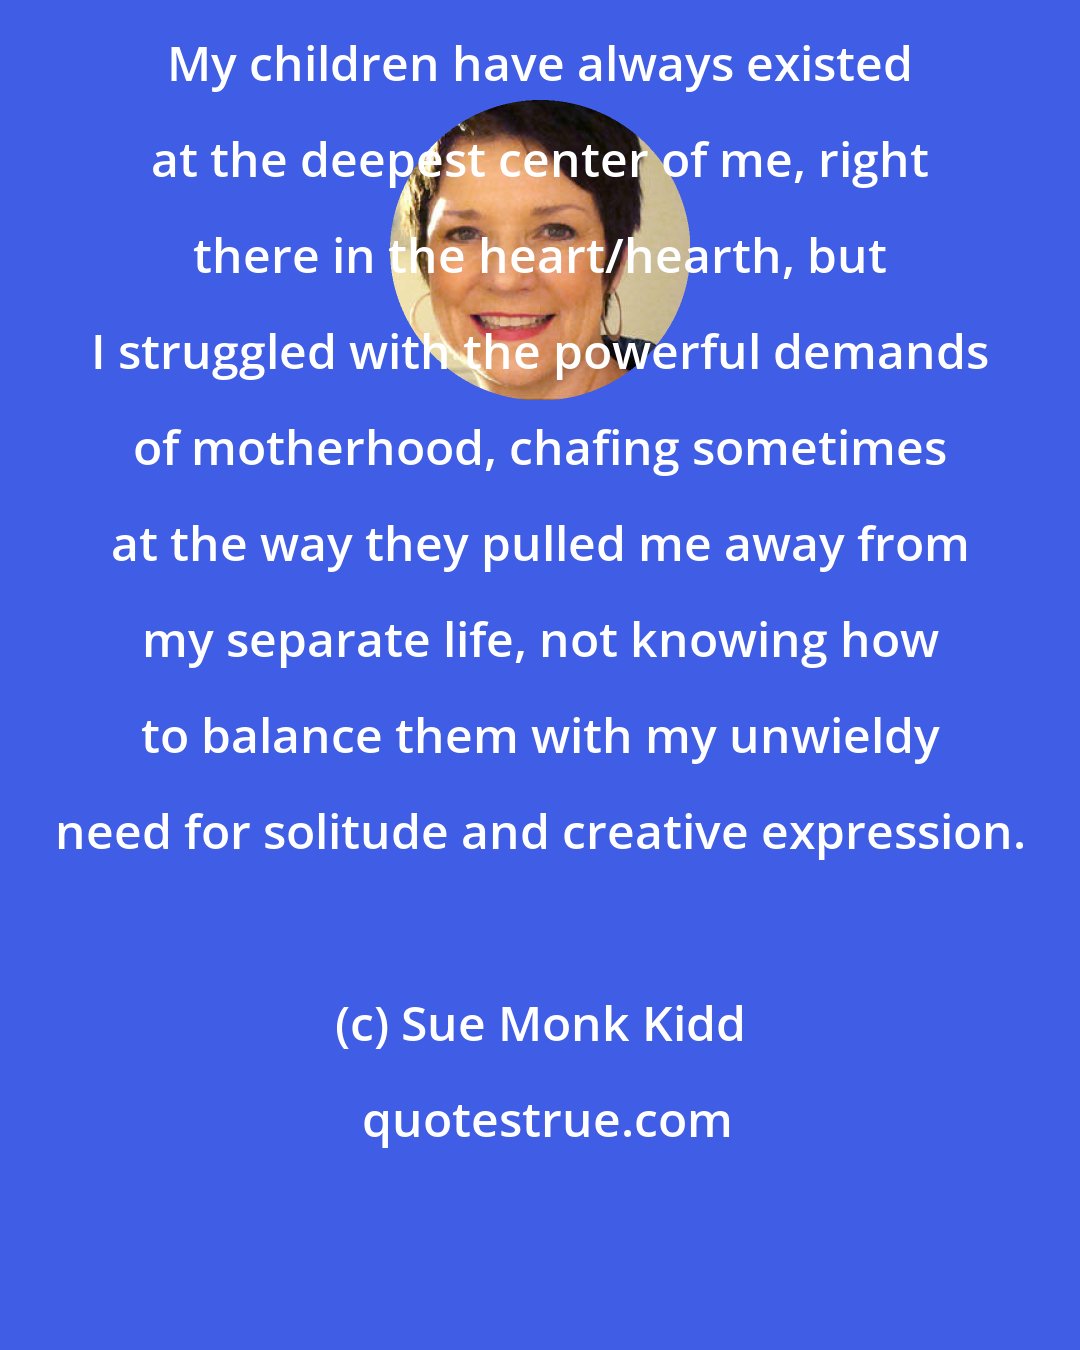 Sue Monk Kidd: My children have always existed at the deepest center of me, right there in the heart/hearth, but I struggled with the powerful demands of motherhood, chafing sometimes at the way they pulled me away from my separate life, not knowing how to balance them with my unwieldy need for solitude and creative expression.